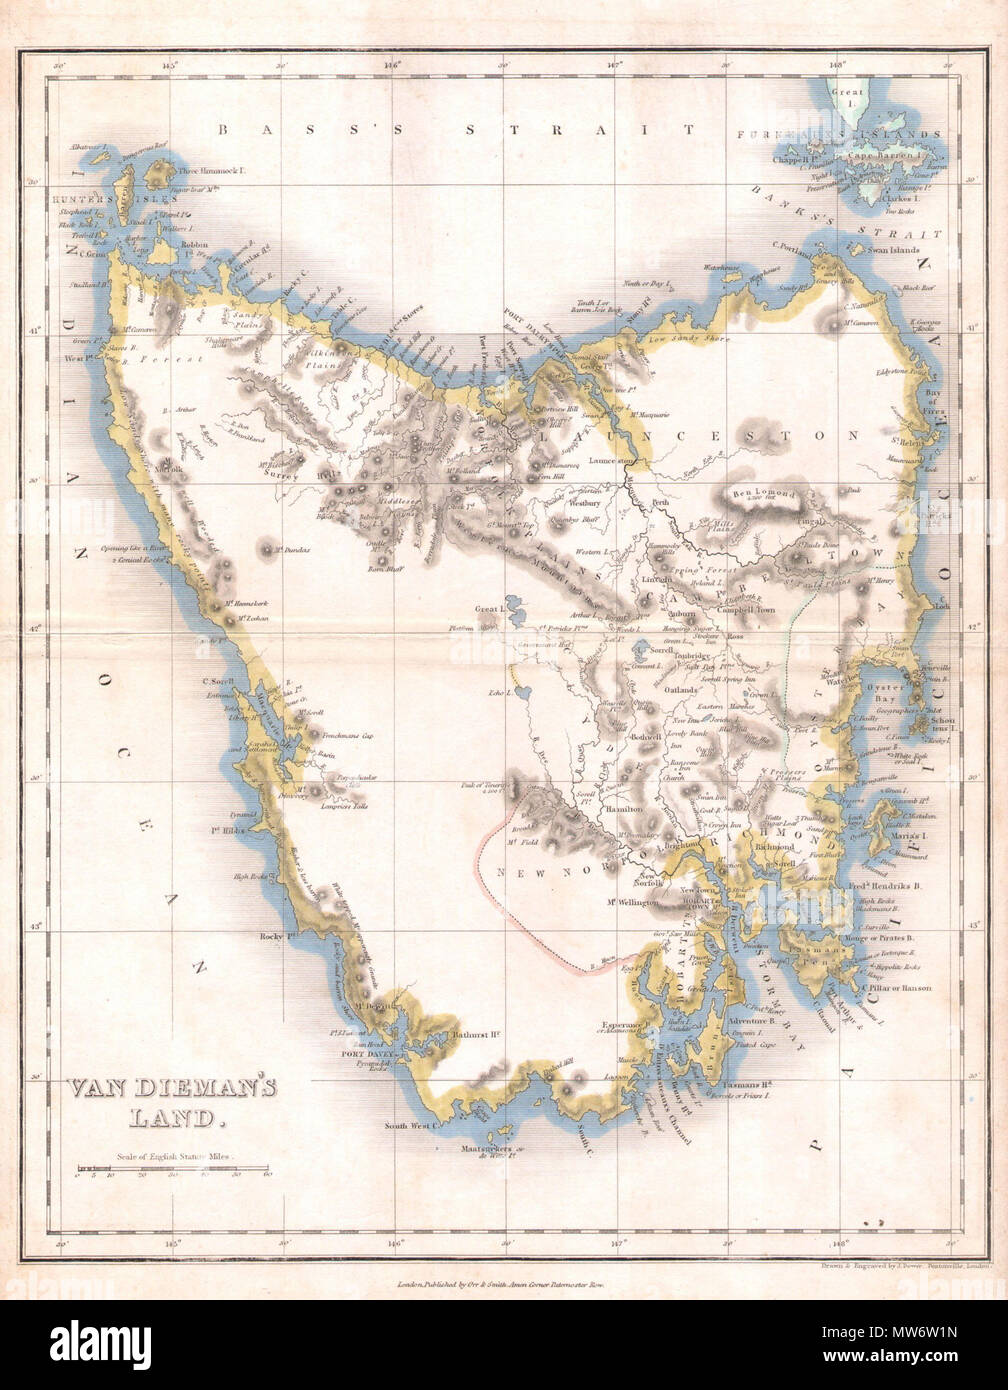 . Van Dieman's Land.  English: A very rare and unusual example of John Dower’s 1837 map of Tasmania or Van Dieman’s Land. Depicts the island in considerable detail with good notes on geographical features, especially along the coast. Maps of Tasmania are exceptionally rare and this one is no exception. Prepared by John Dower and published by Orr and Smith in 1837. . 1837 (undated)  7 1837 Dower Map of Van Dieman's Land or Tasmania - Geographicus - Tazmania-dower-1837 Stock Photo